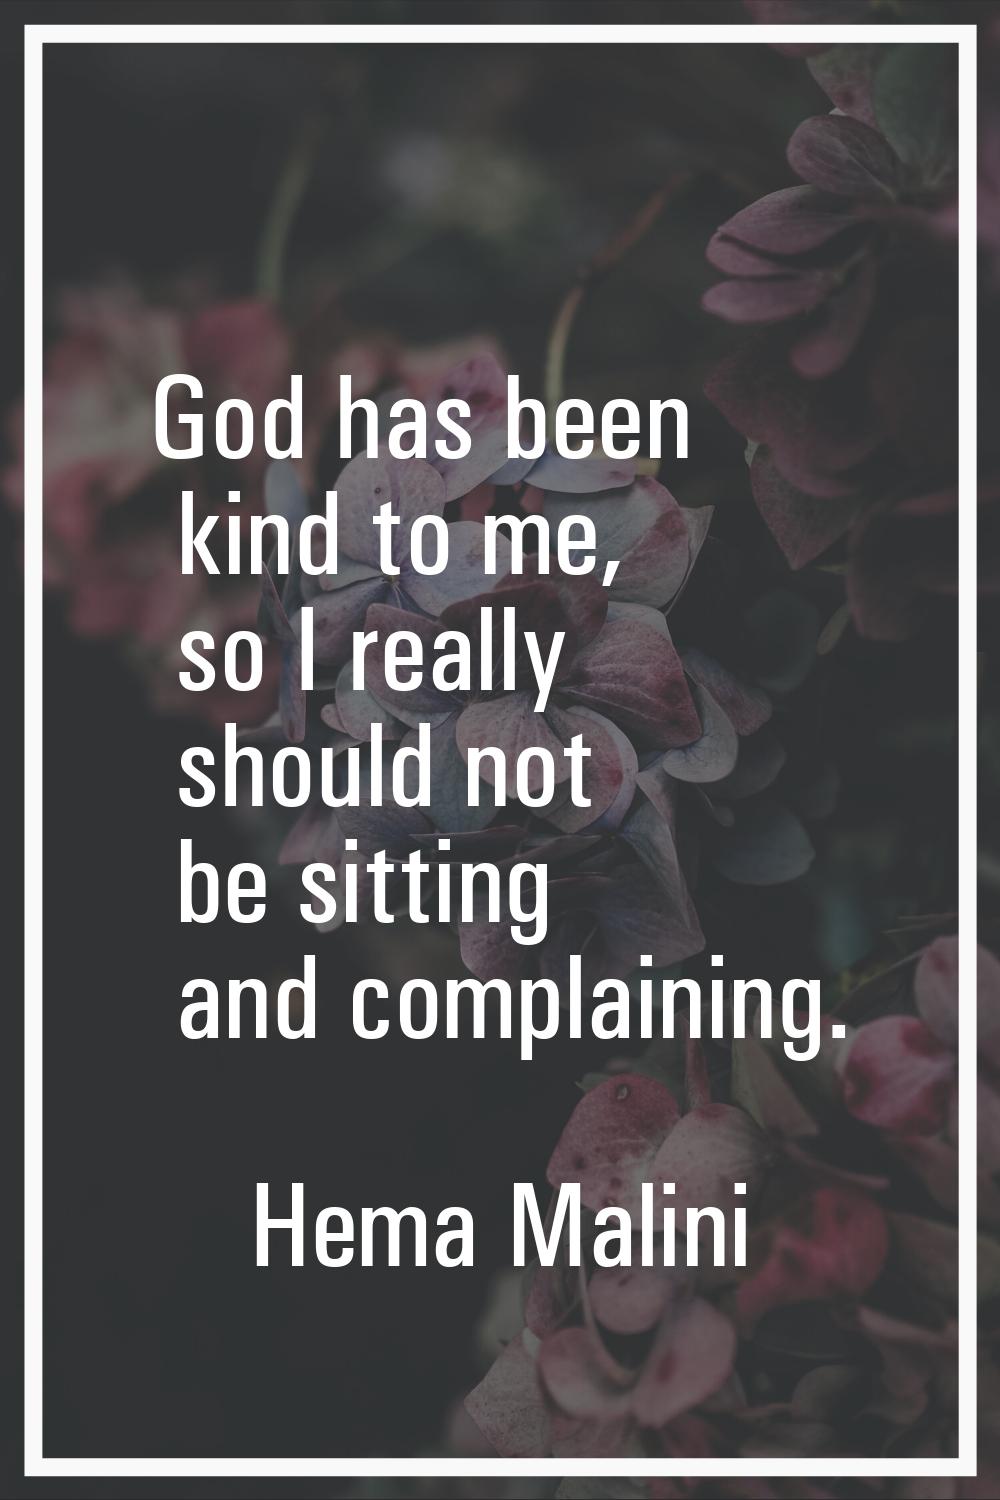 God has been kind to me, so I really should not be sitting and complaining.